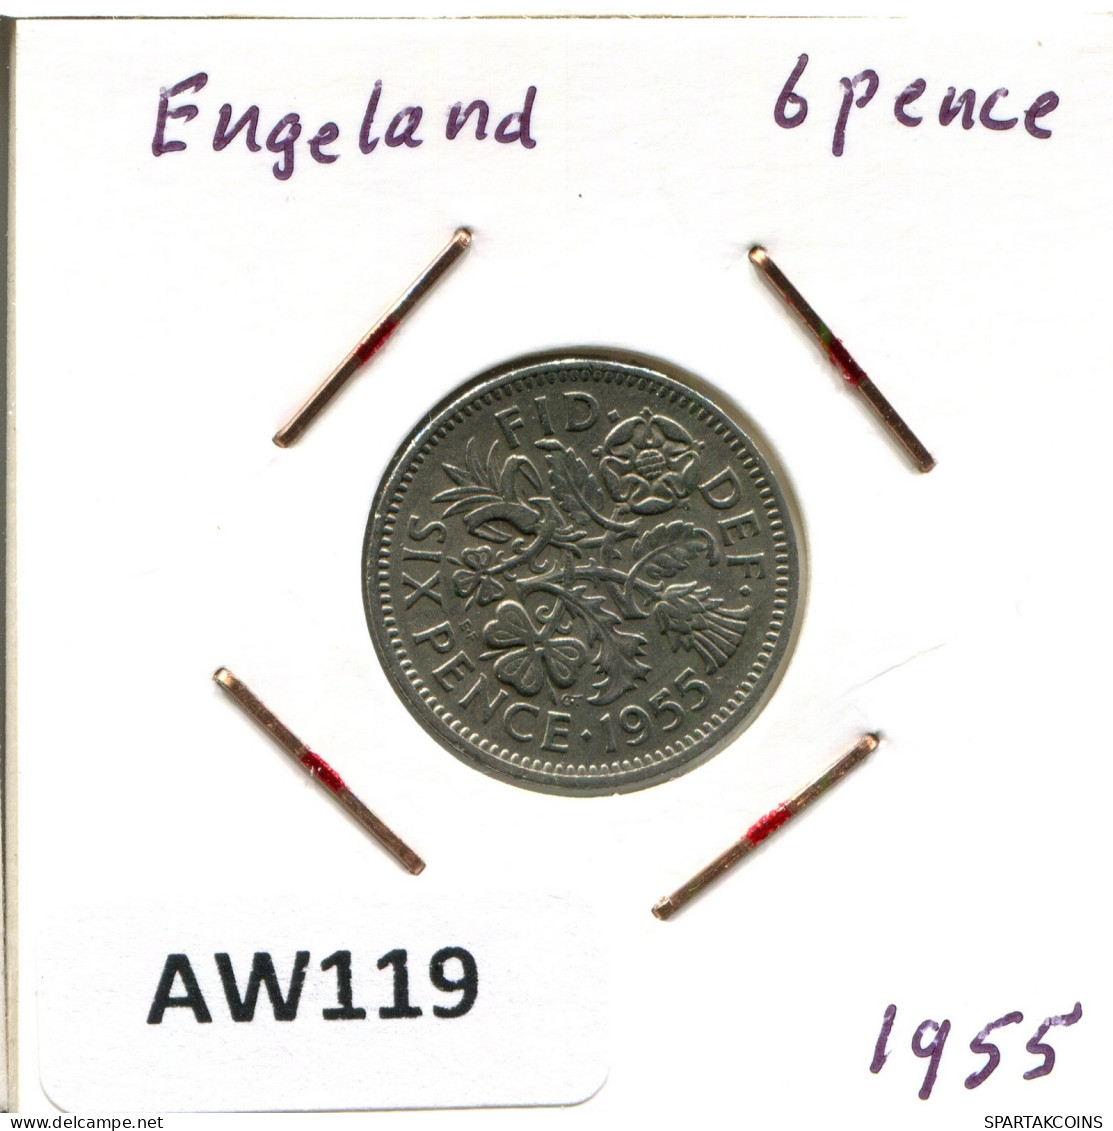 SIXPENCE 1955 UK GREAT BRITAIN Coin #AW119.U.A - H. 6 Pence